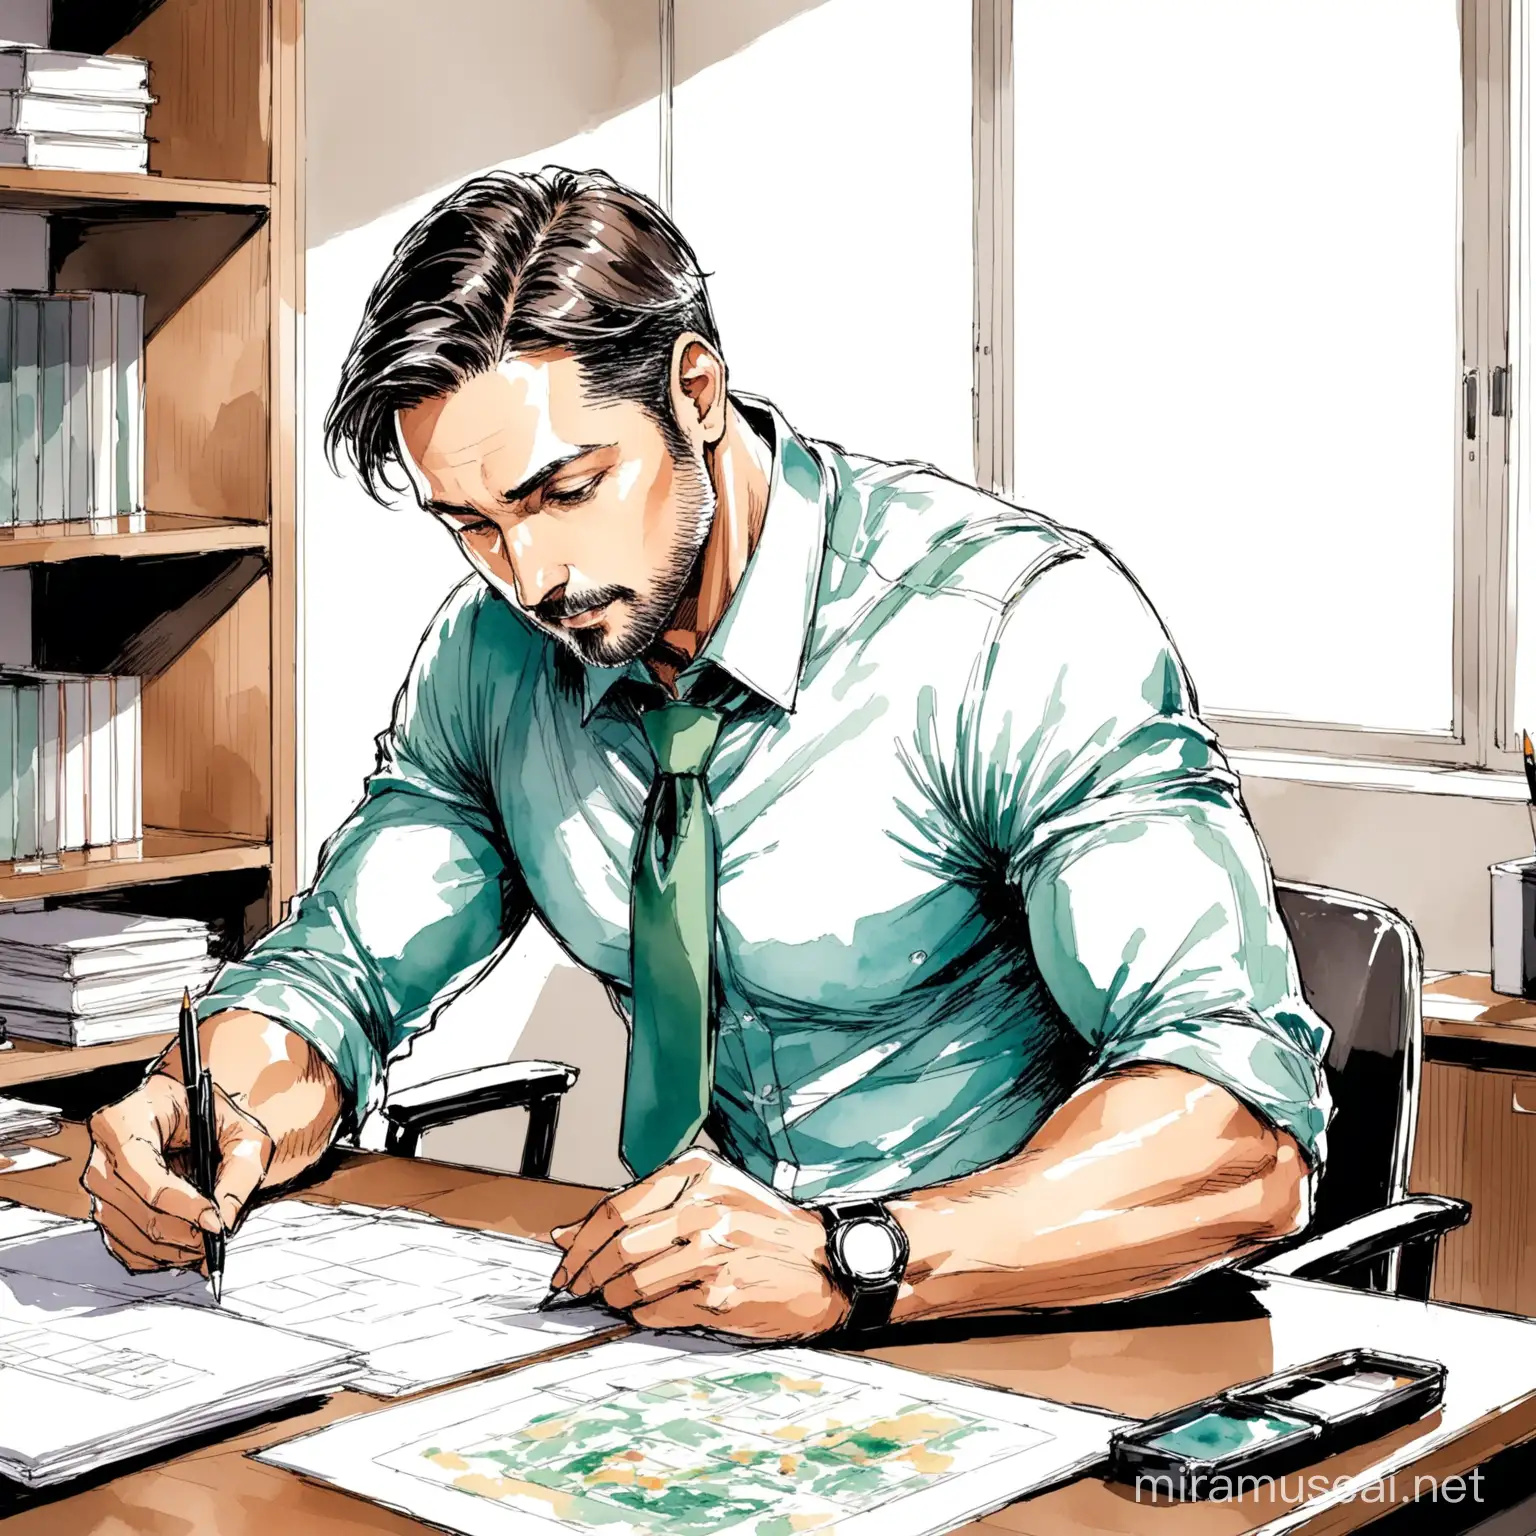 an image of a young father with athletic body wearing office outfit with an army cut in his 40s in his office desk busy doing office works. Ensure that the image is in a sketch type and water color.
